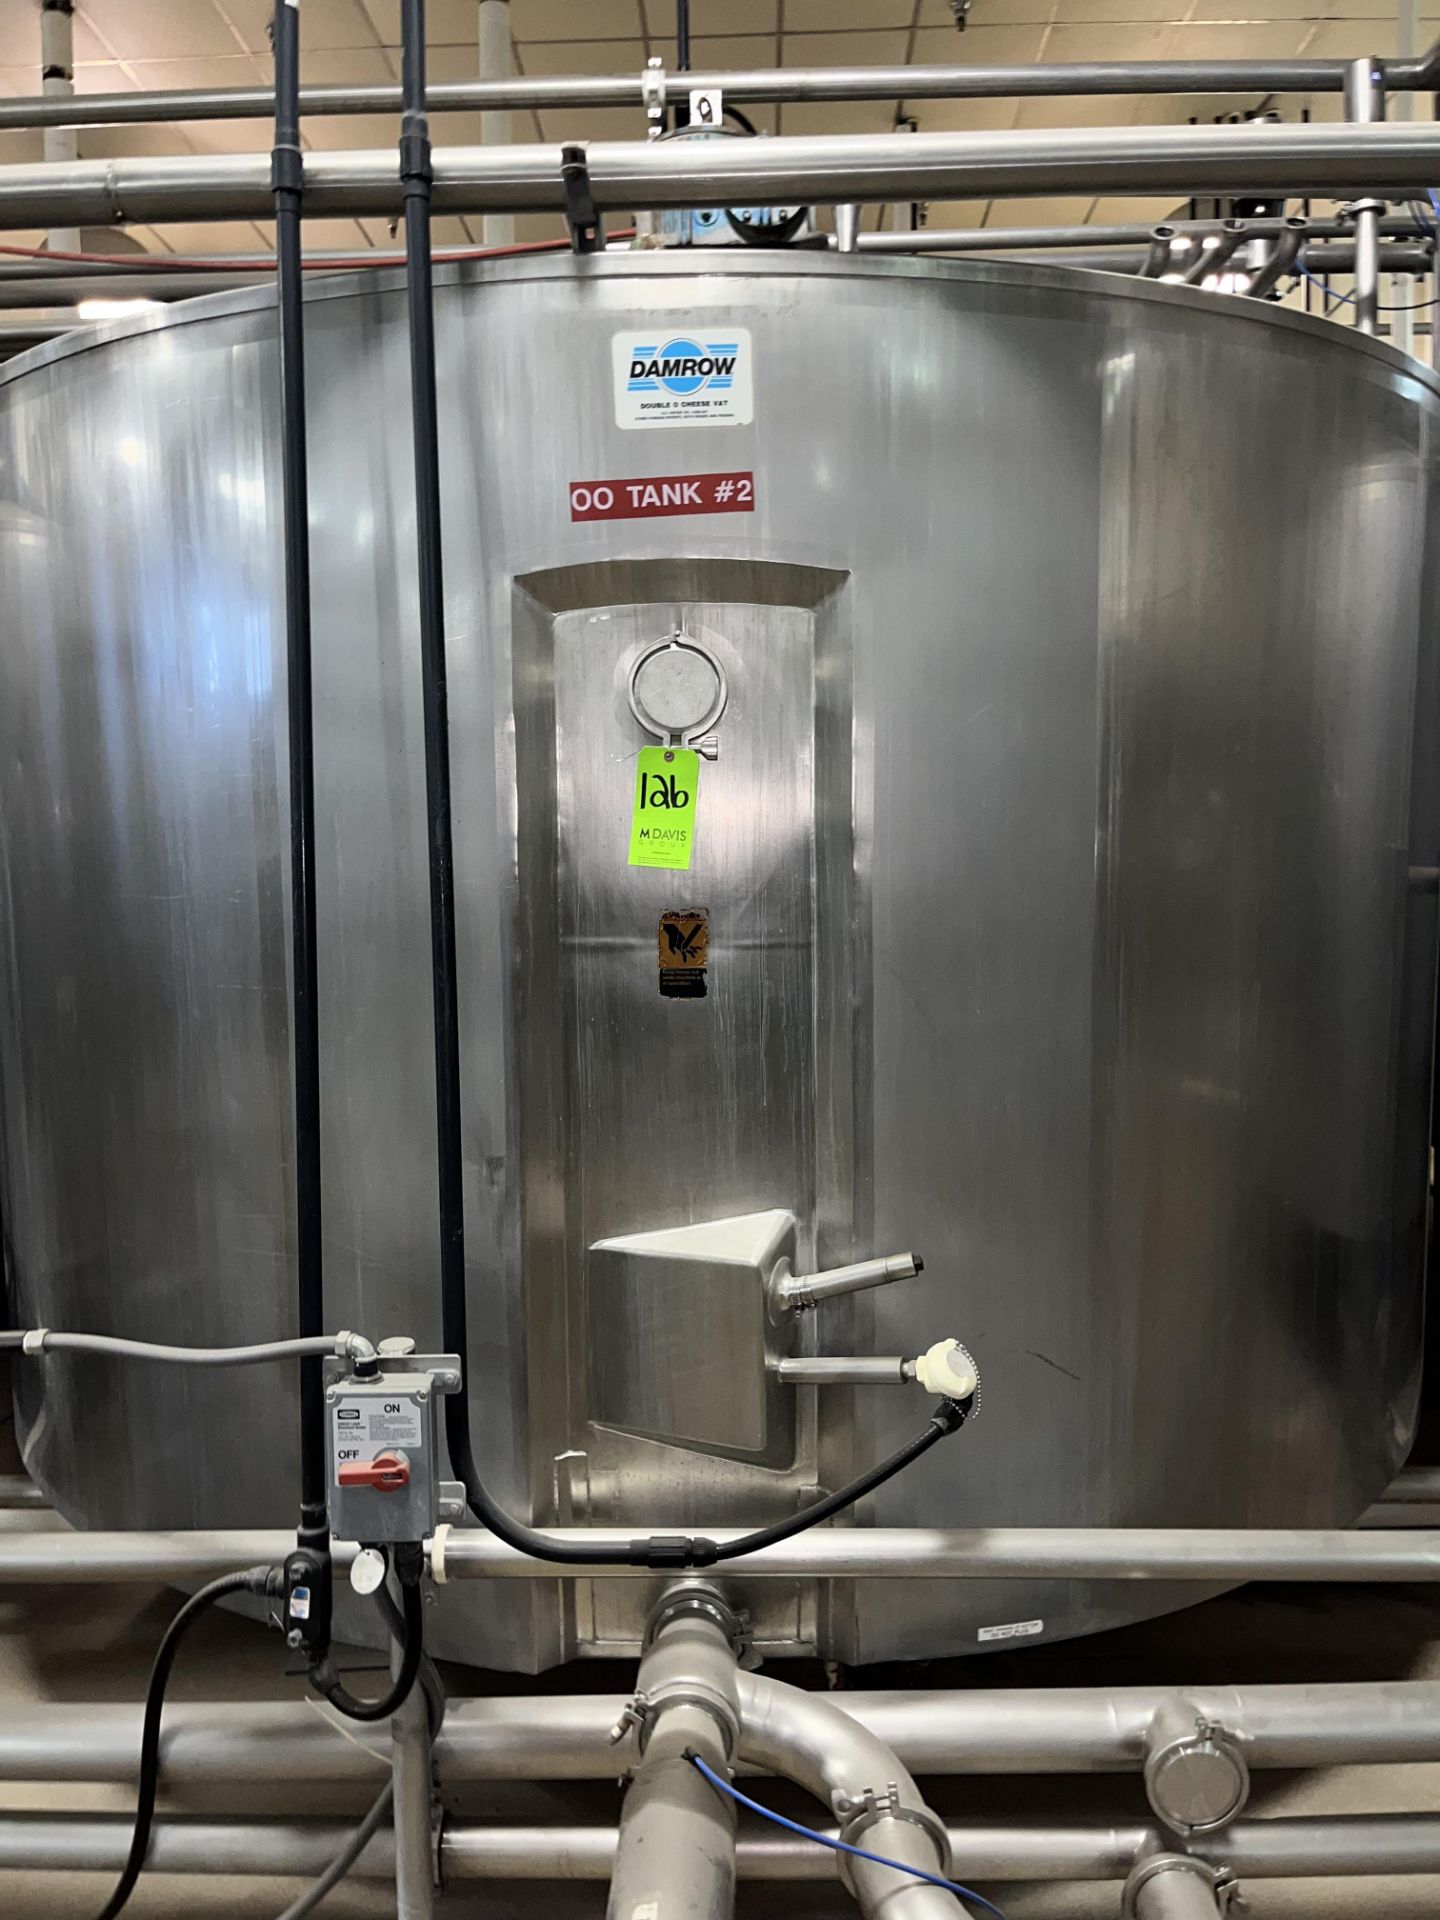 Damrow Double O S/S Cheese Vat (OO Tank #2) (LOCATED IN MANTECA, CA)